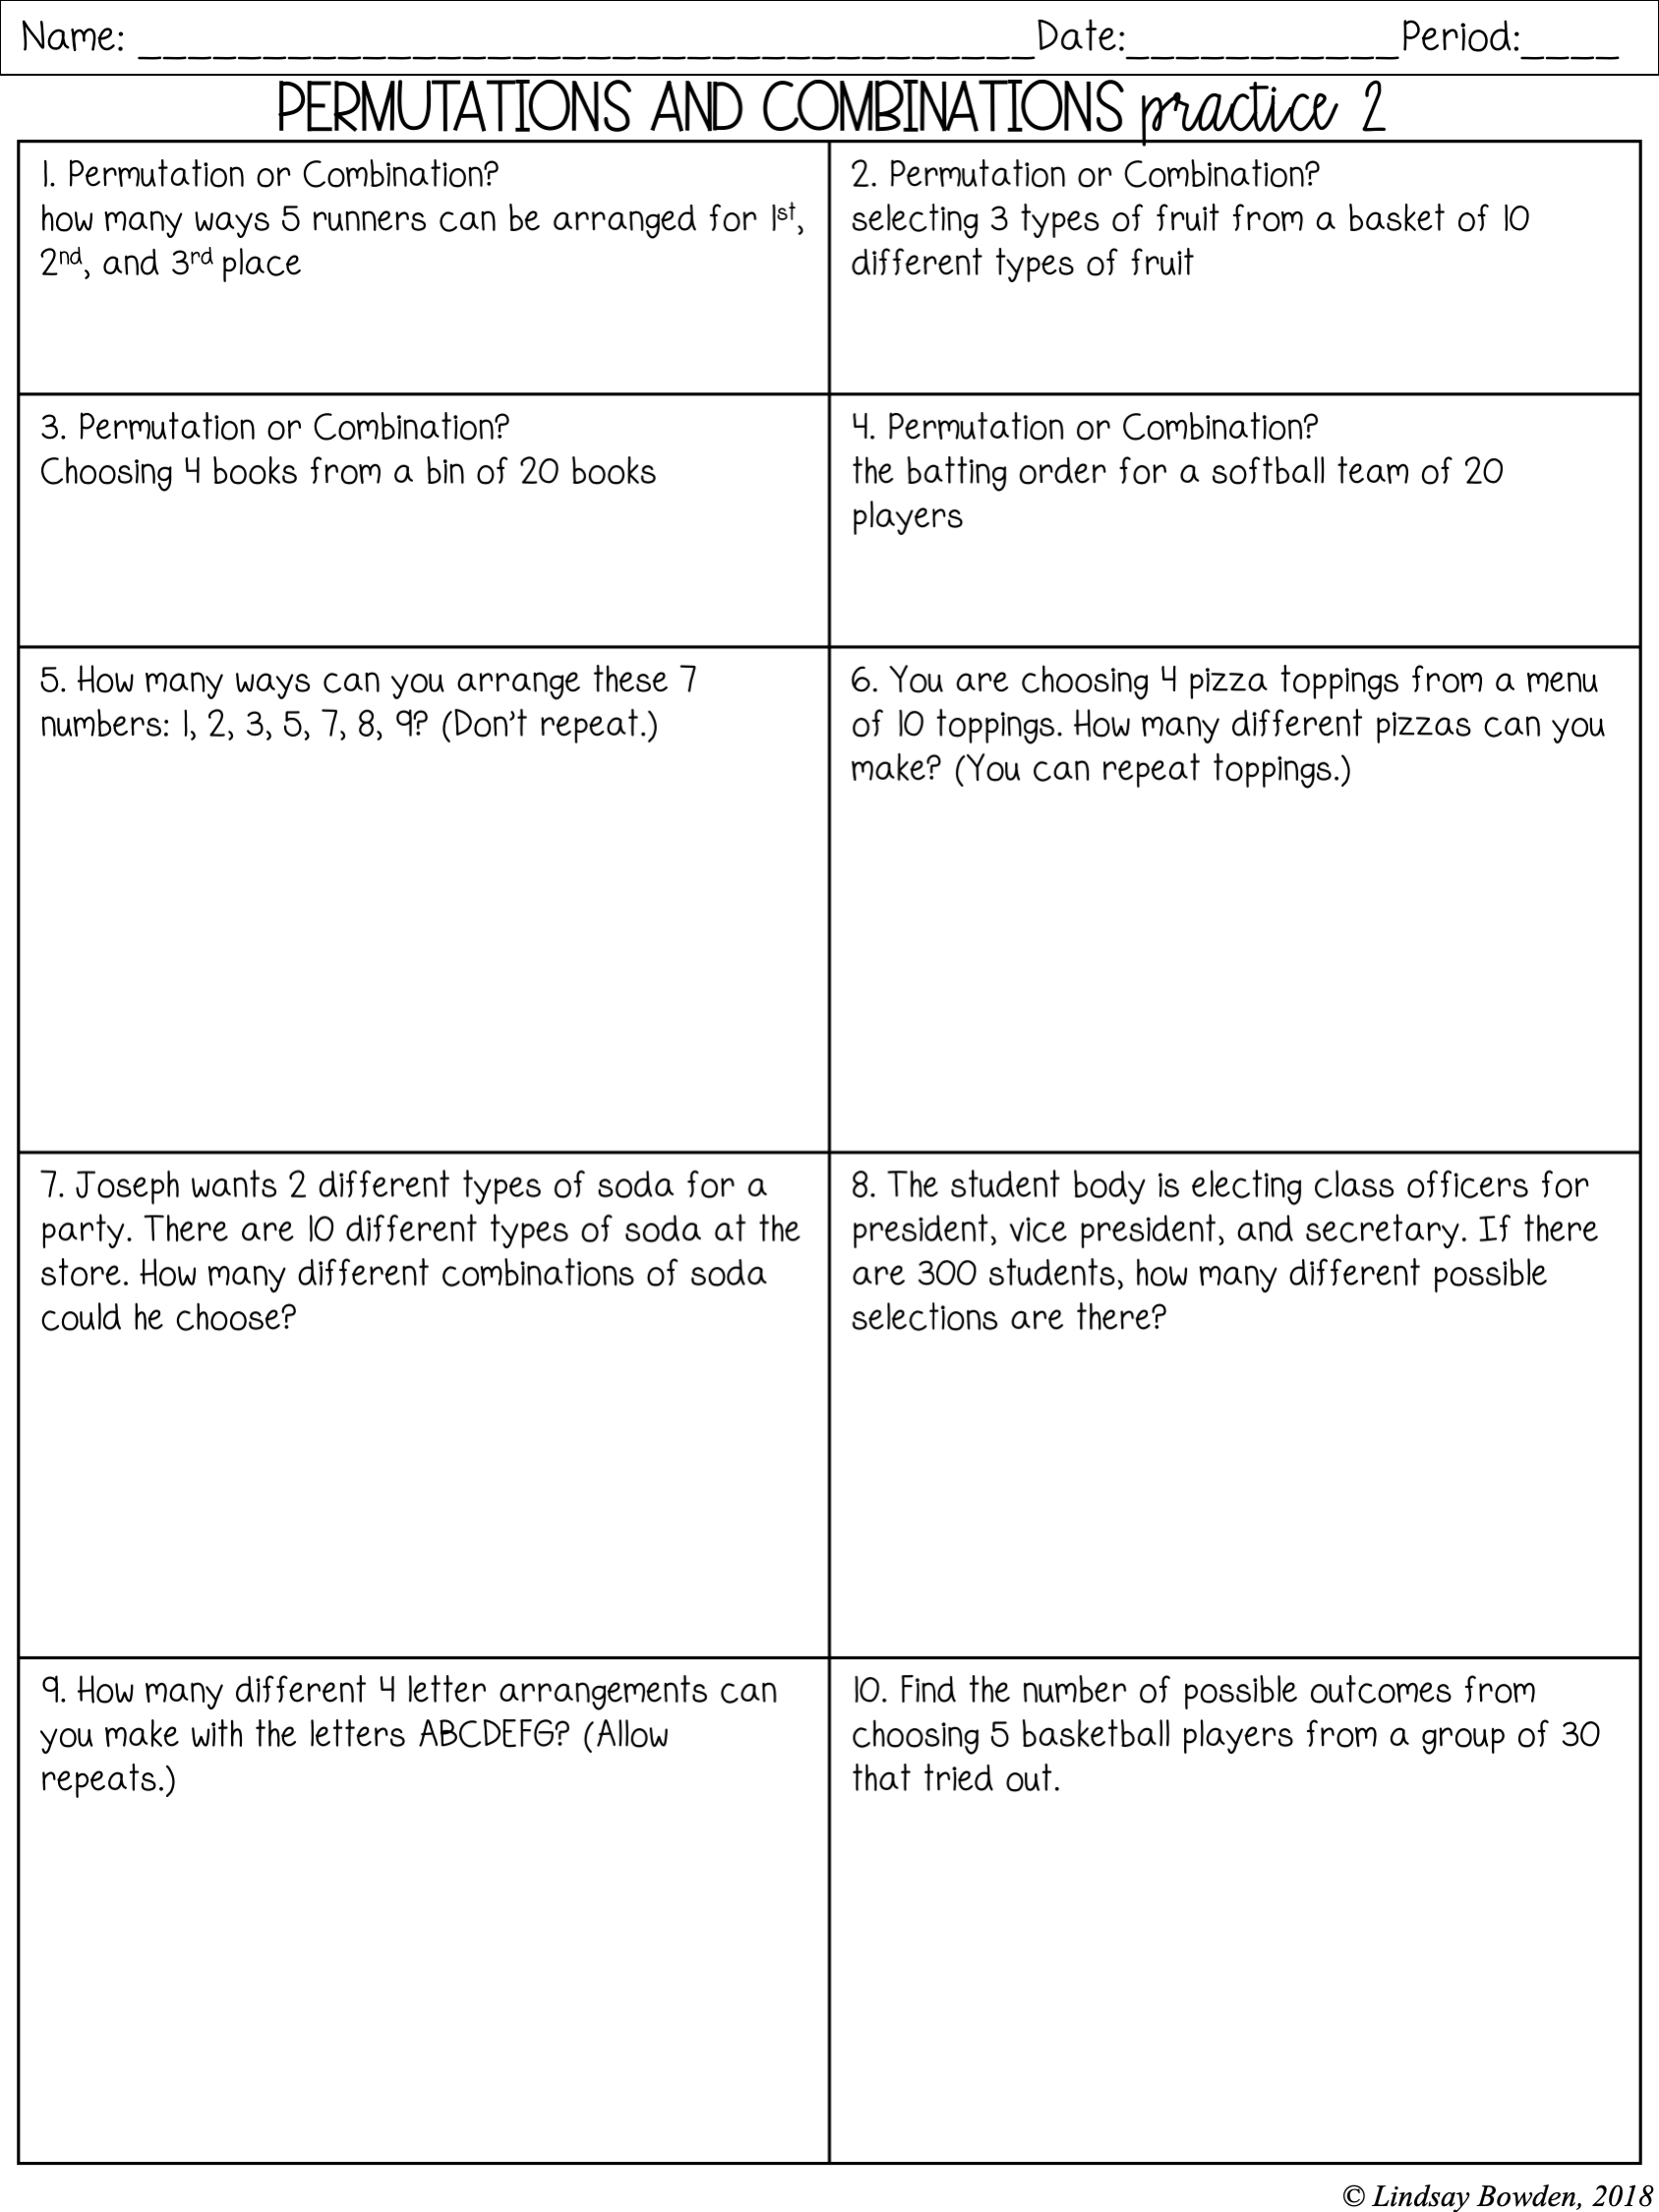 Permutations and Combinations Notes and Worksheets - Lindsay Bowden With Regard To Permutations And Combinations Worksheet